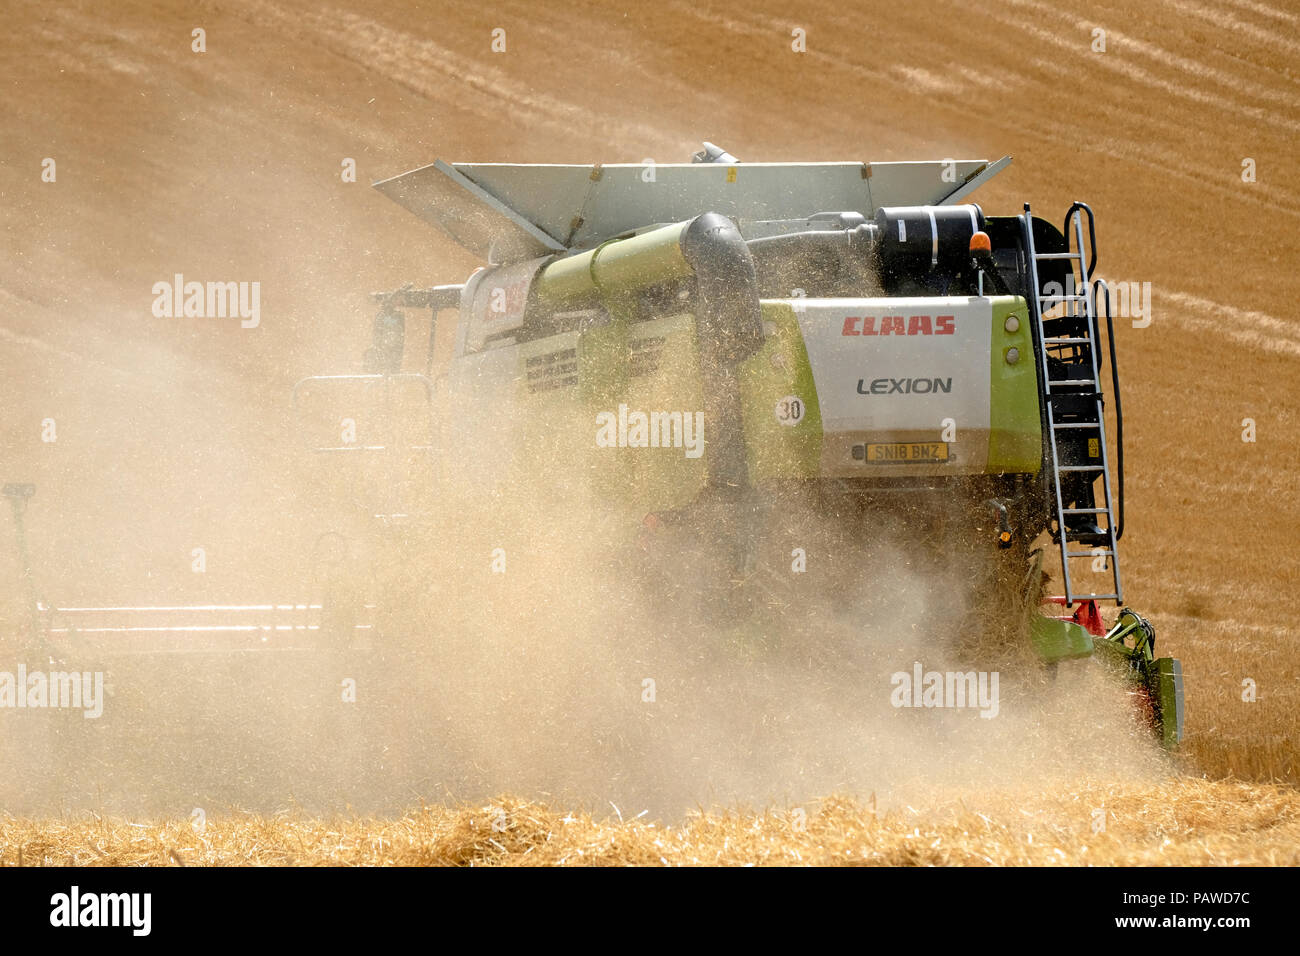 Kelso, Scotland, 25 July 2018.   Combine Harvester in Scottish Borders Tom Stewart from Sandyknowe Farm, near Kelso in the Scottish Borders, in a Claas Lexion 660 with Vario 770 cutter bar combine harvester, working in fields near his farm on Wednesday 25 July 2018.  (Photo by Rob Gray / Freelance) Credit: Rob Gray/Alamy Live News Stock Photo